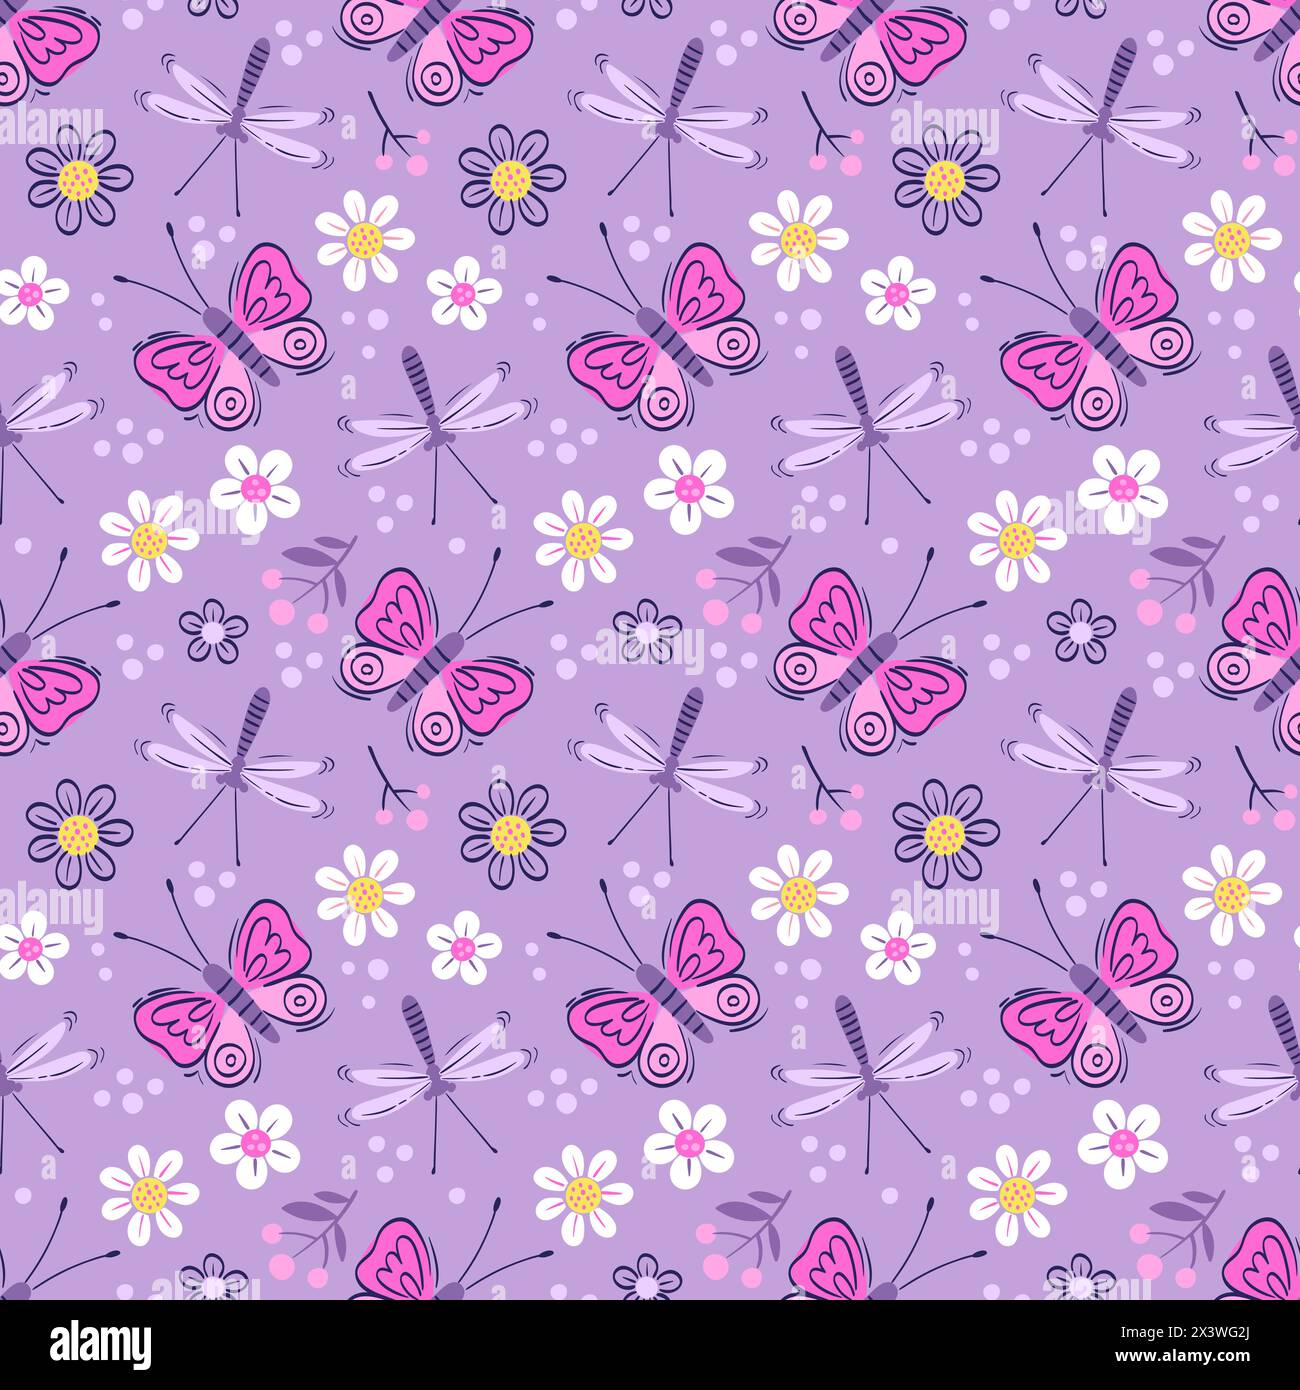 Vector seamless pattern of with butterflies and dragonflies. Stylized insects and flowers on a purple background Stock Vector